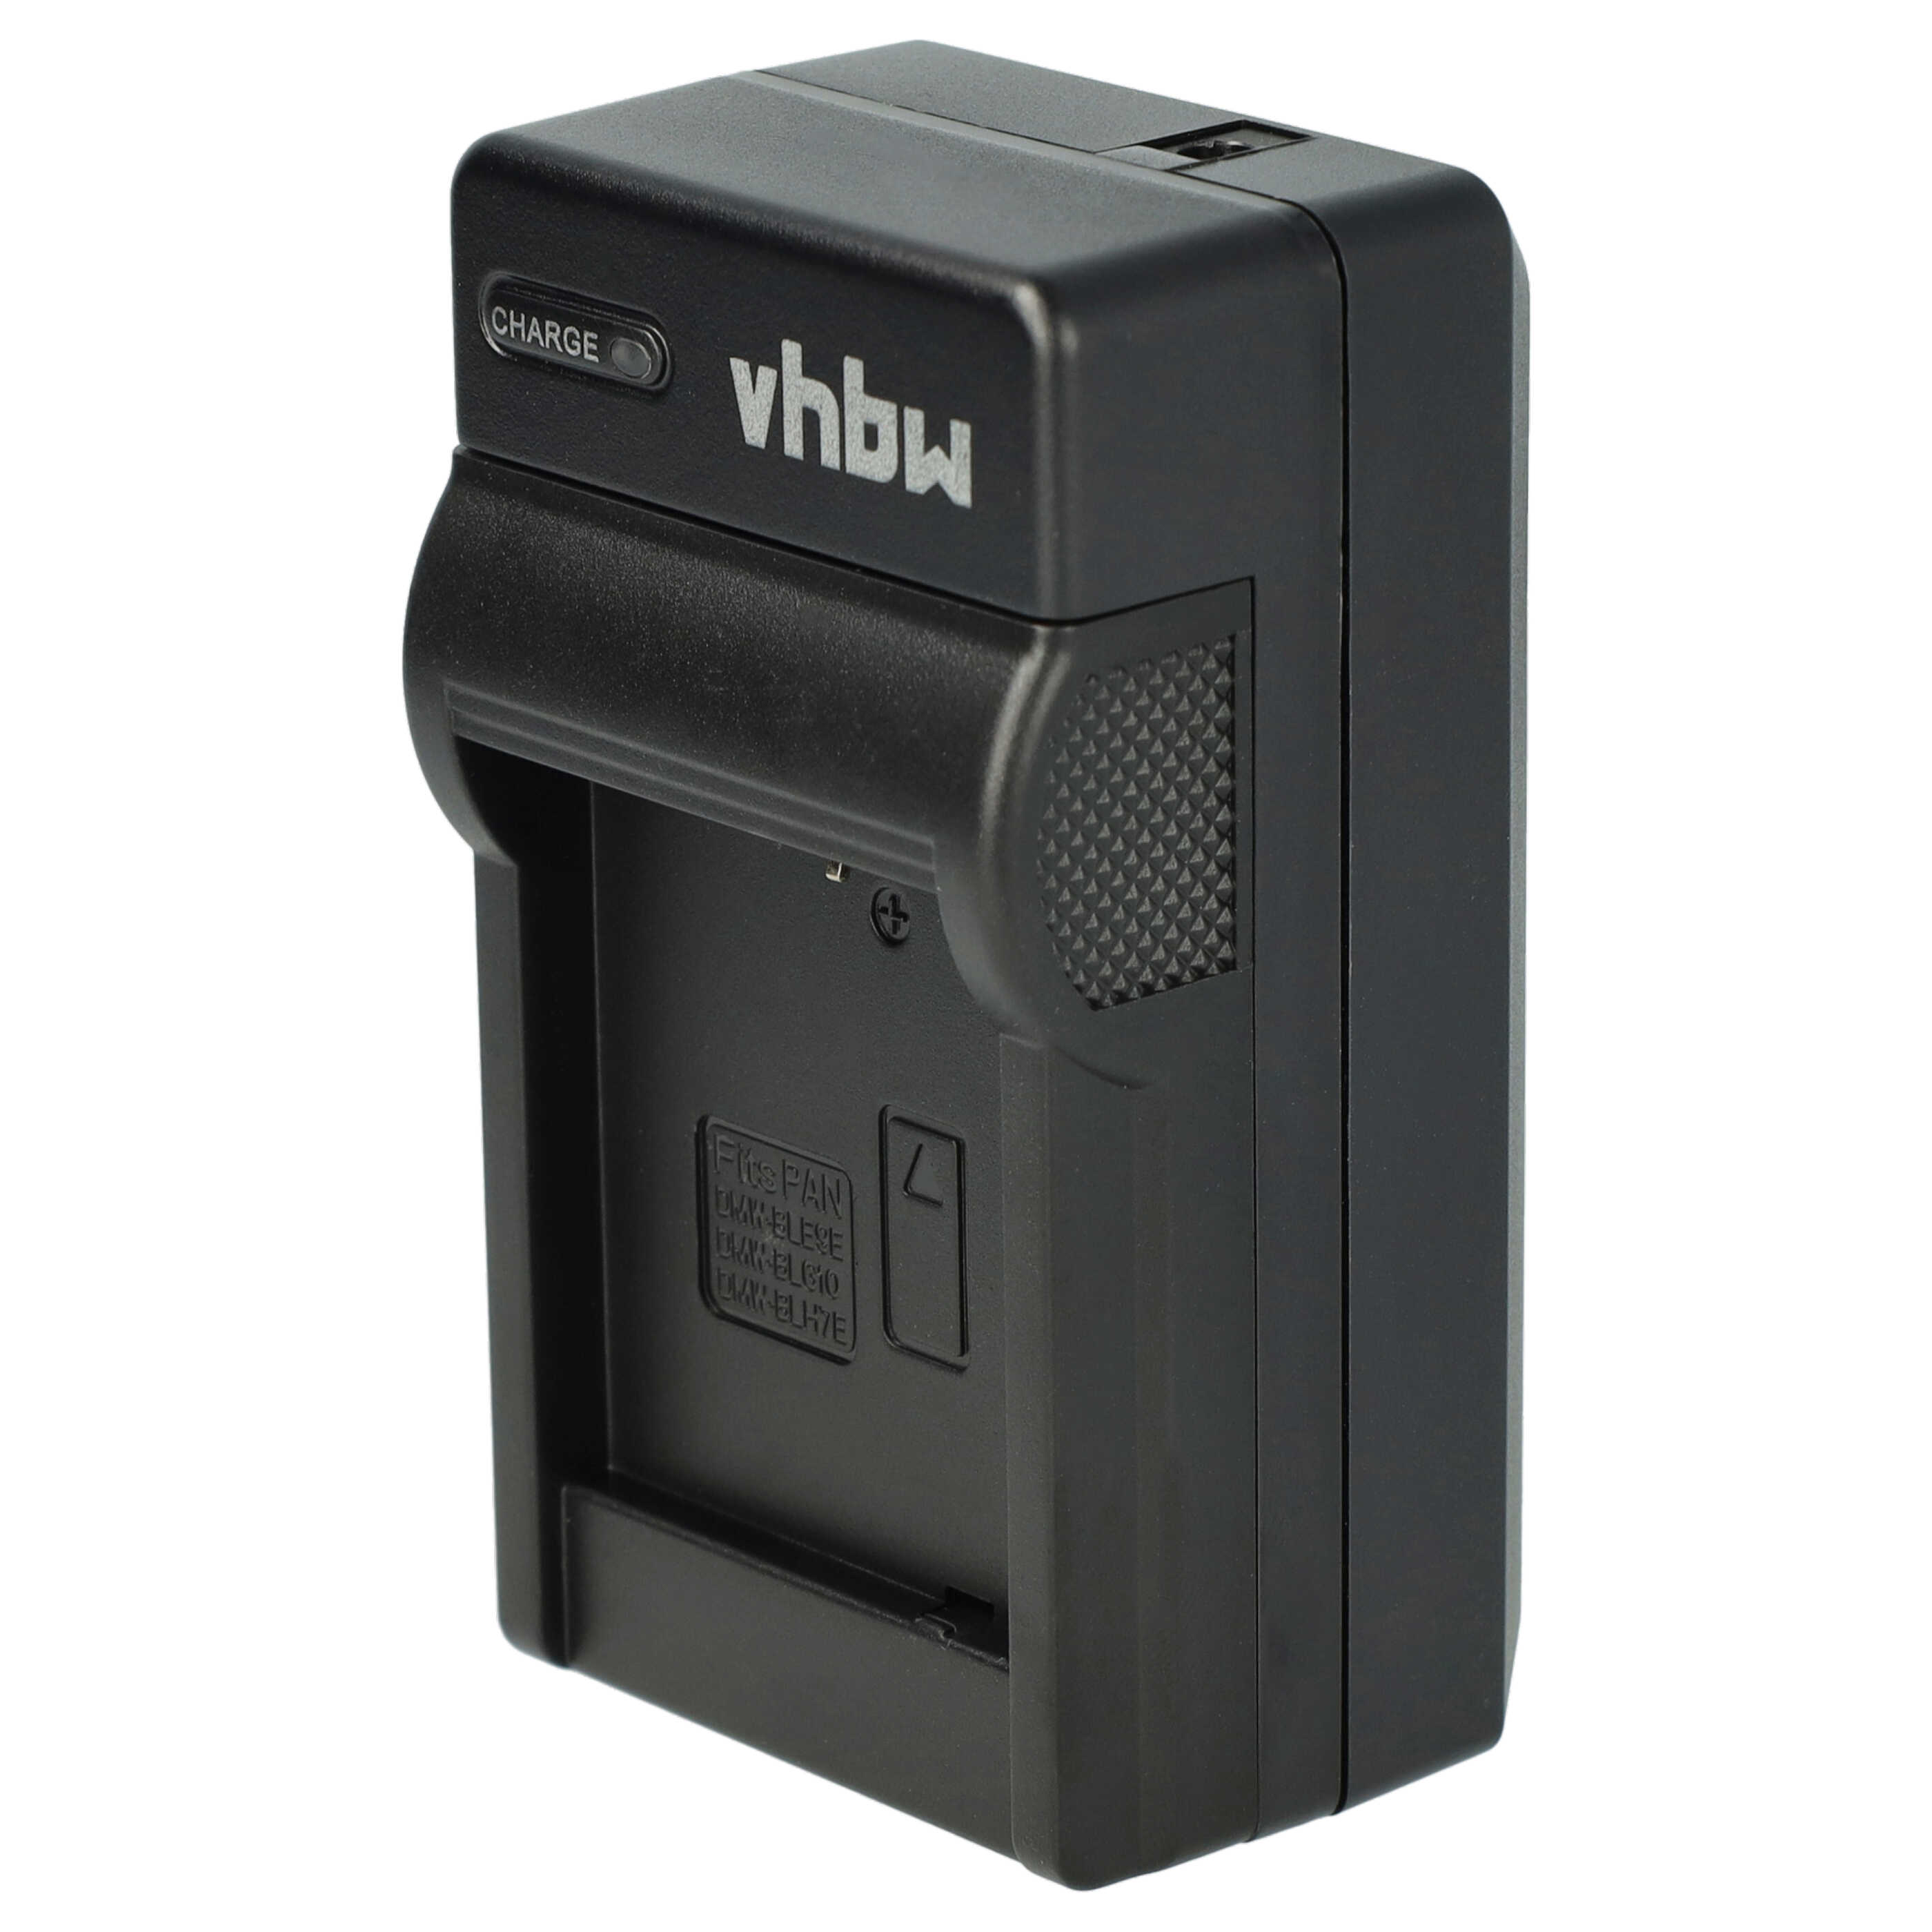 Battery Charger suitable for Lumix DMC-TZ101 Camera etc. - 0.6 A, 8.4 V